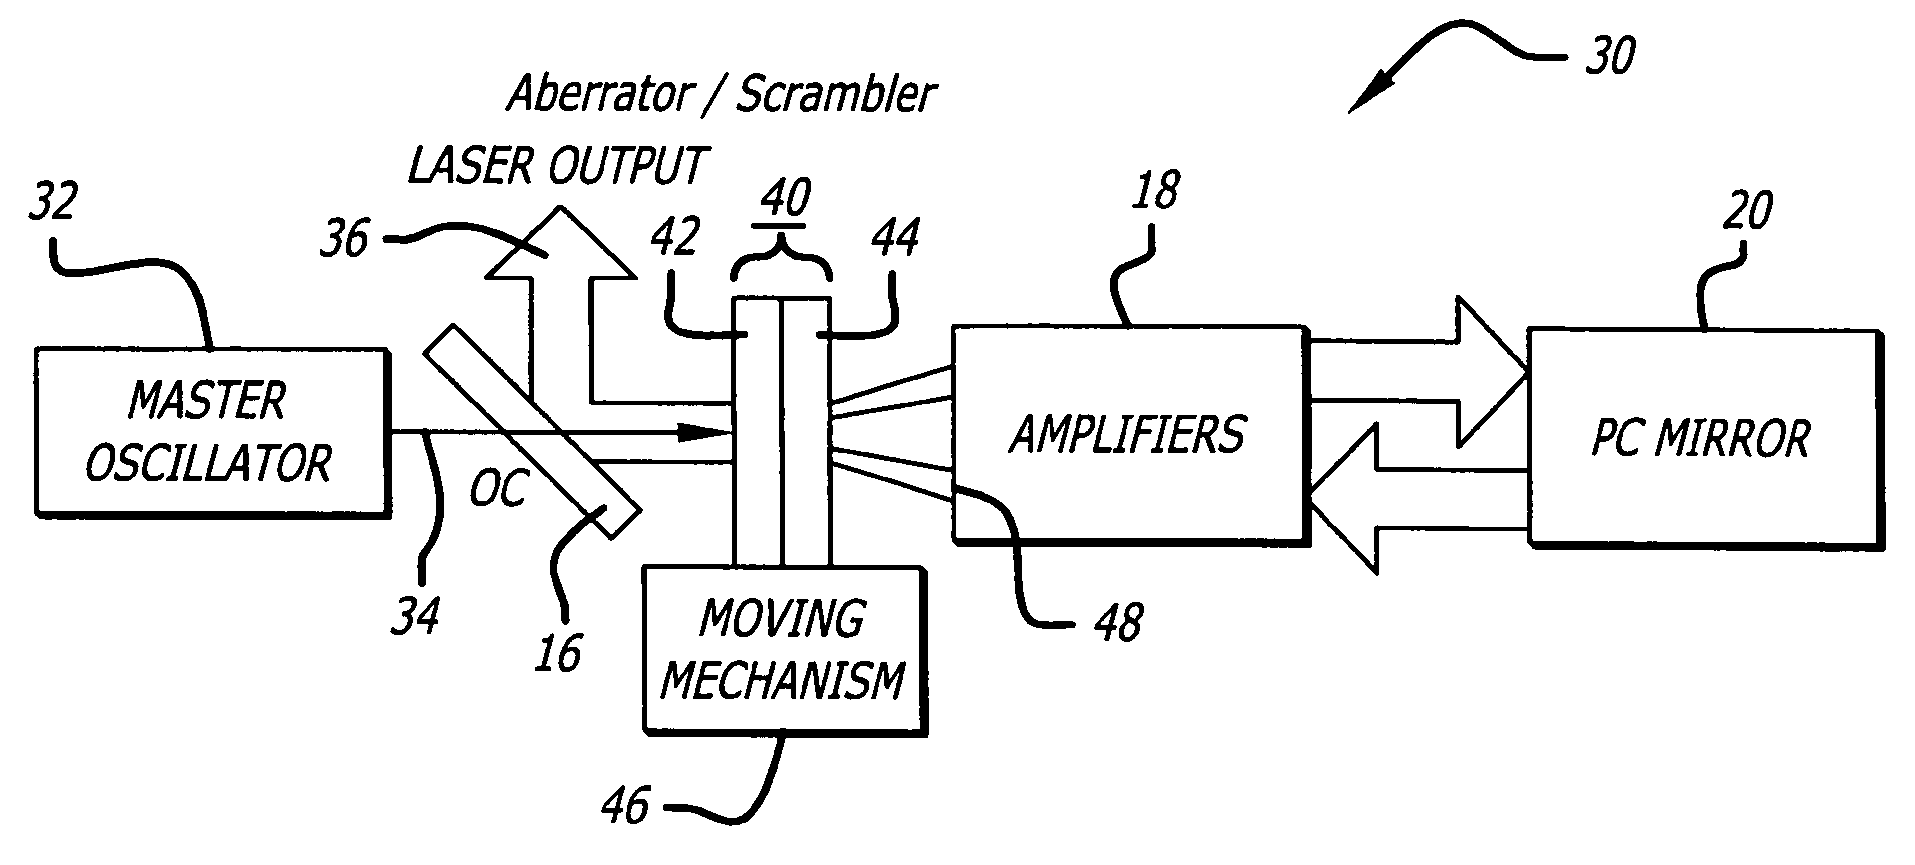 Laser amplifier power extraction enhancement system and method